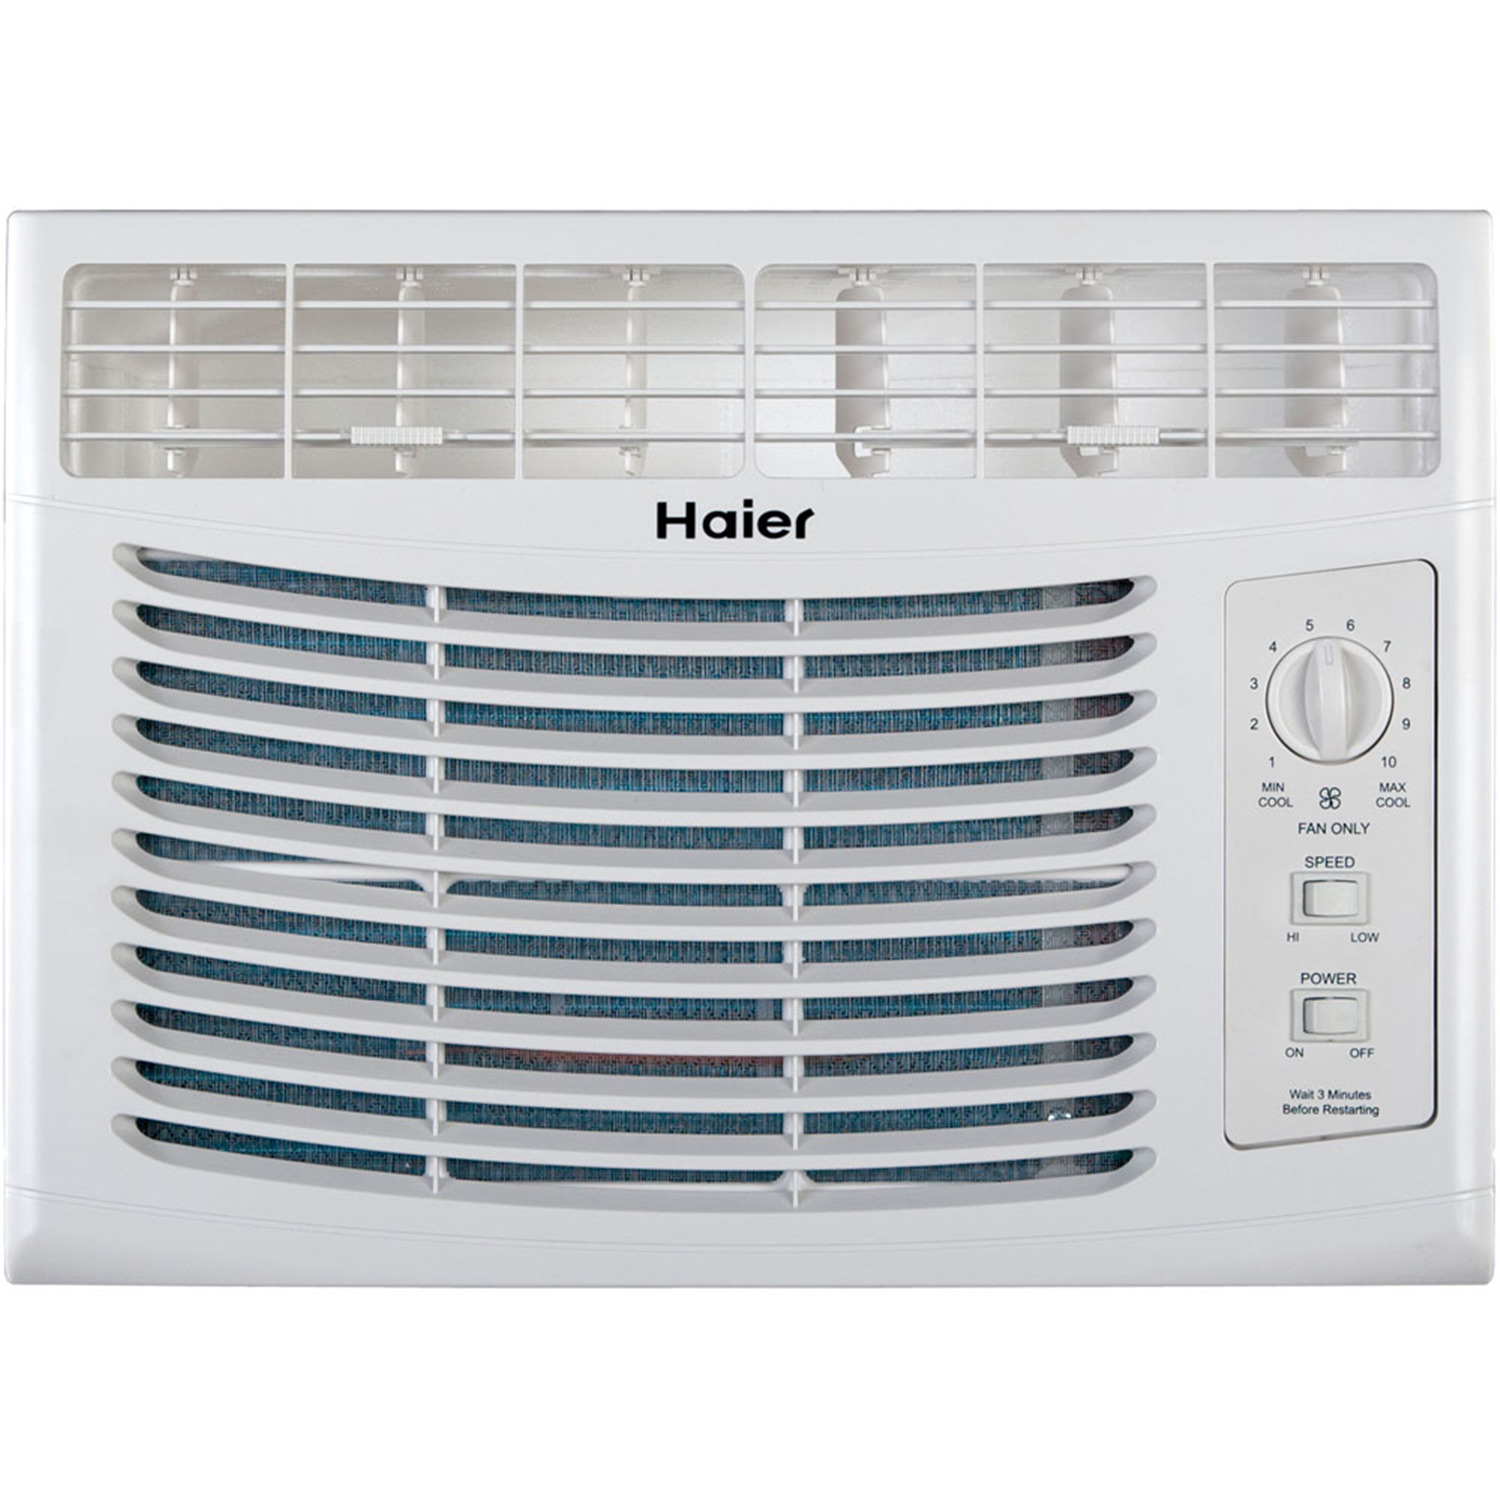 Haier HWF05XCL-L 5,000 BTU 115V Window-Mounted Air Conditioner with Mechanical Controls - image 1 of 5